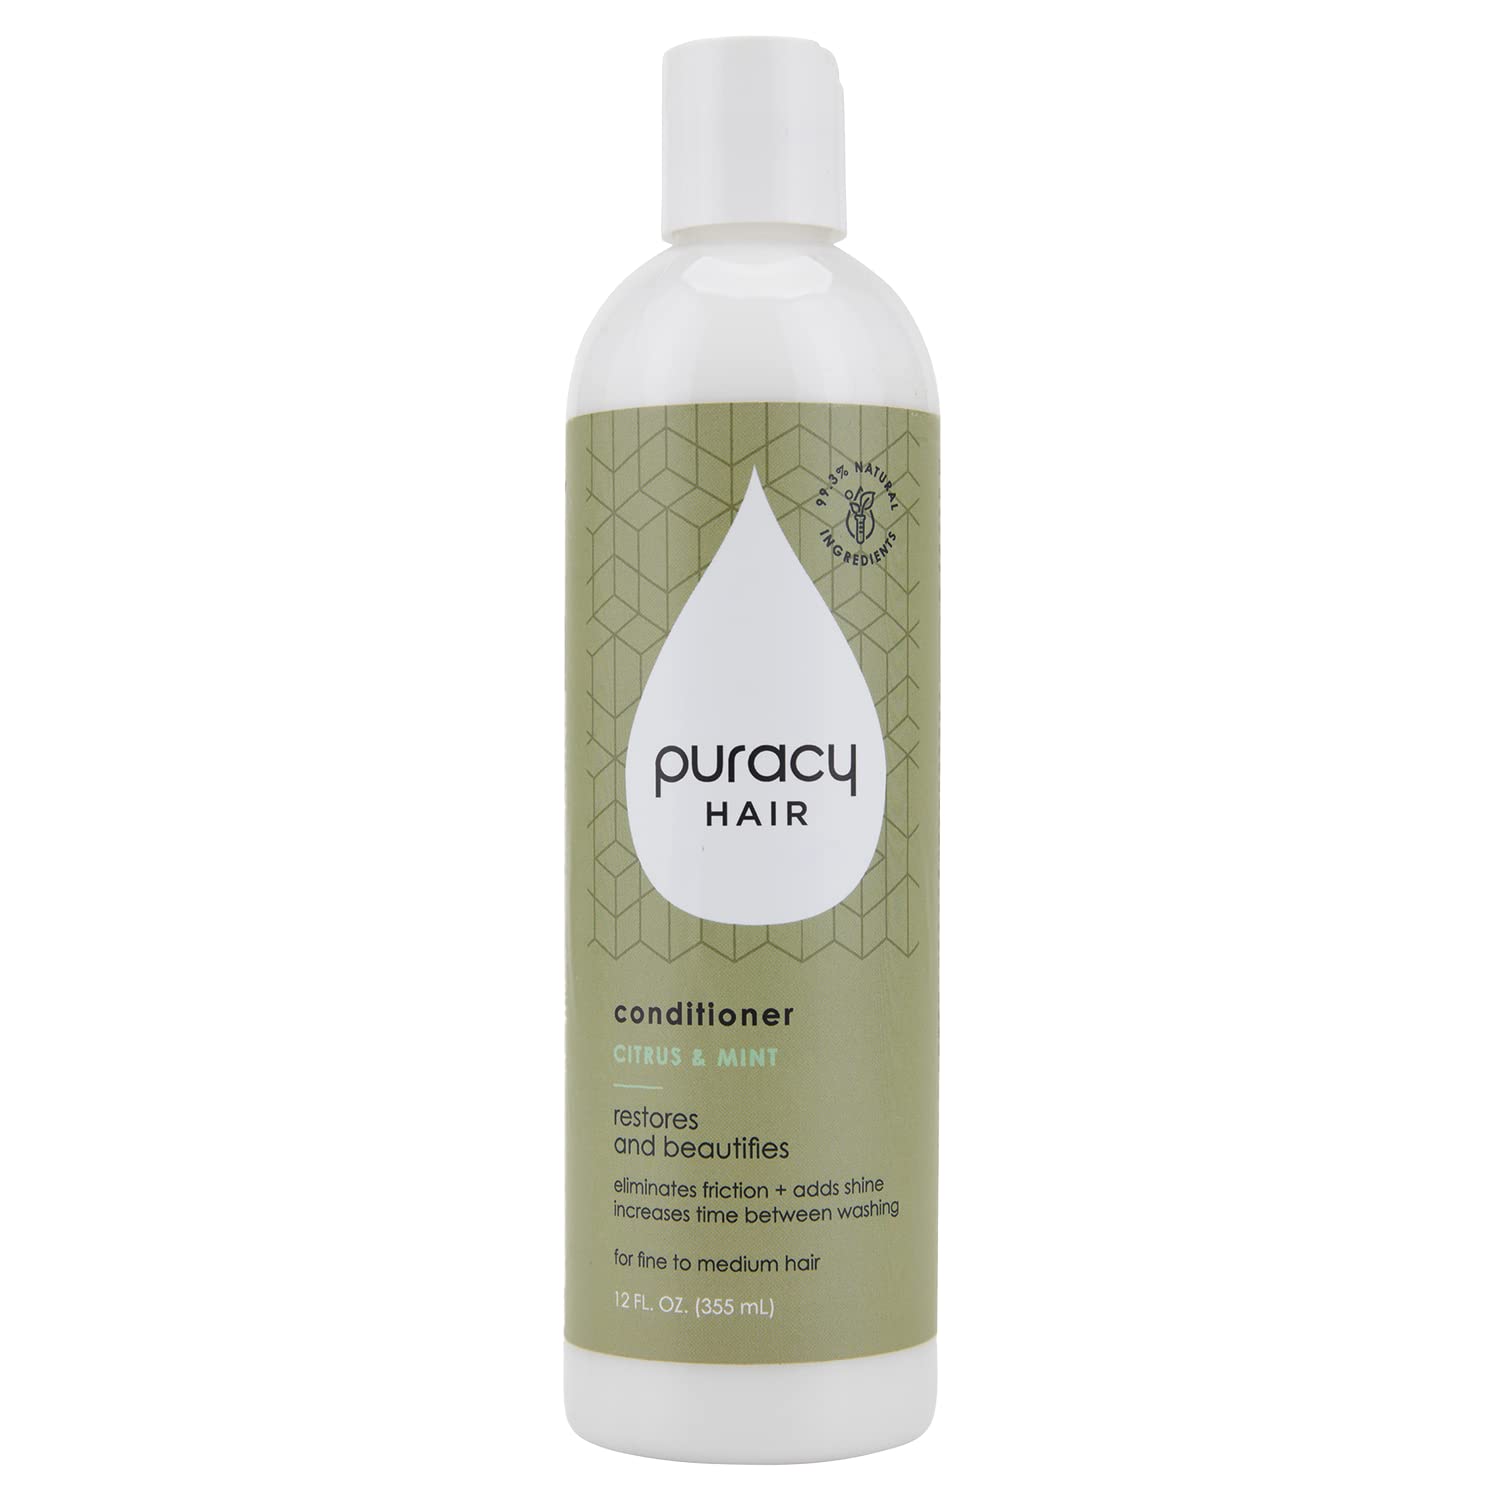 Puracy Conditioner, The Best Hair Days for Fine, Medium, and Color-Treated Hair, Perfect Hair from Pure Ingredients, Hair Stays Cleaner & Silkier Longer, 99.3% Natural Conditioner, 12 Ounce